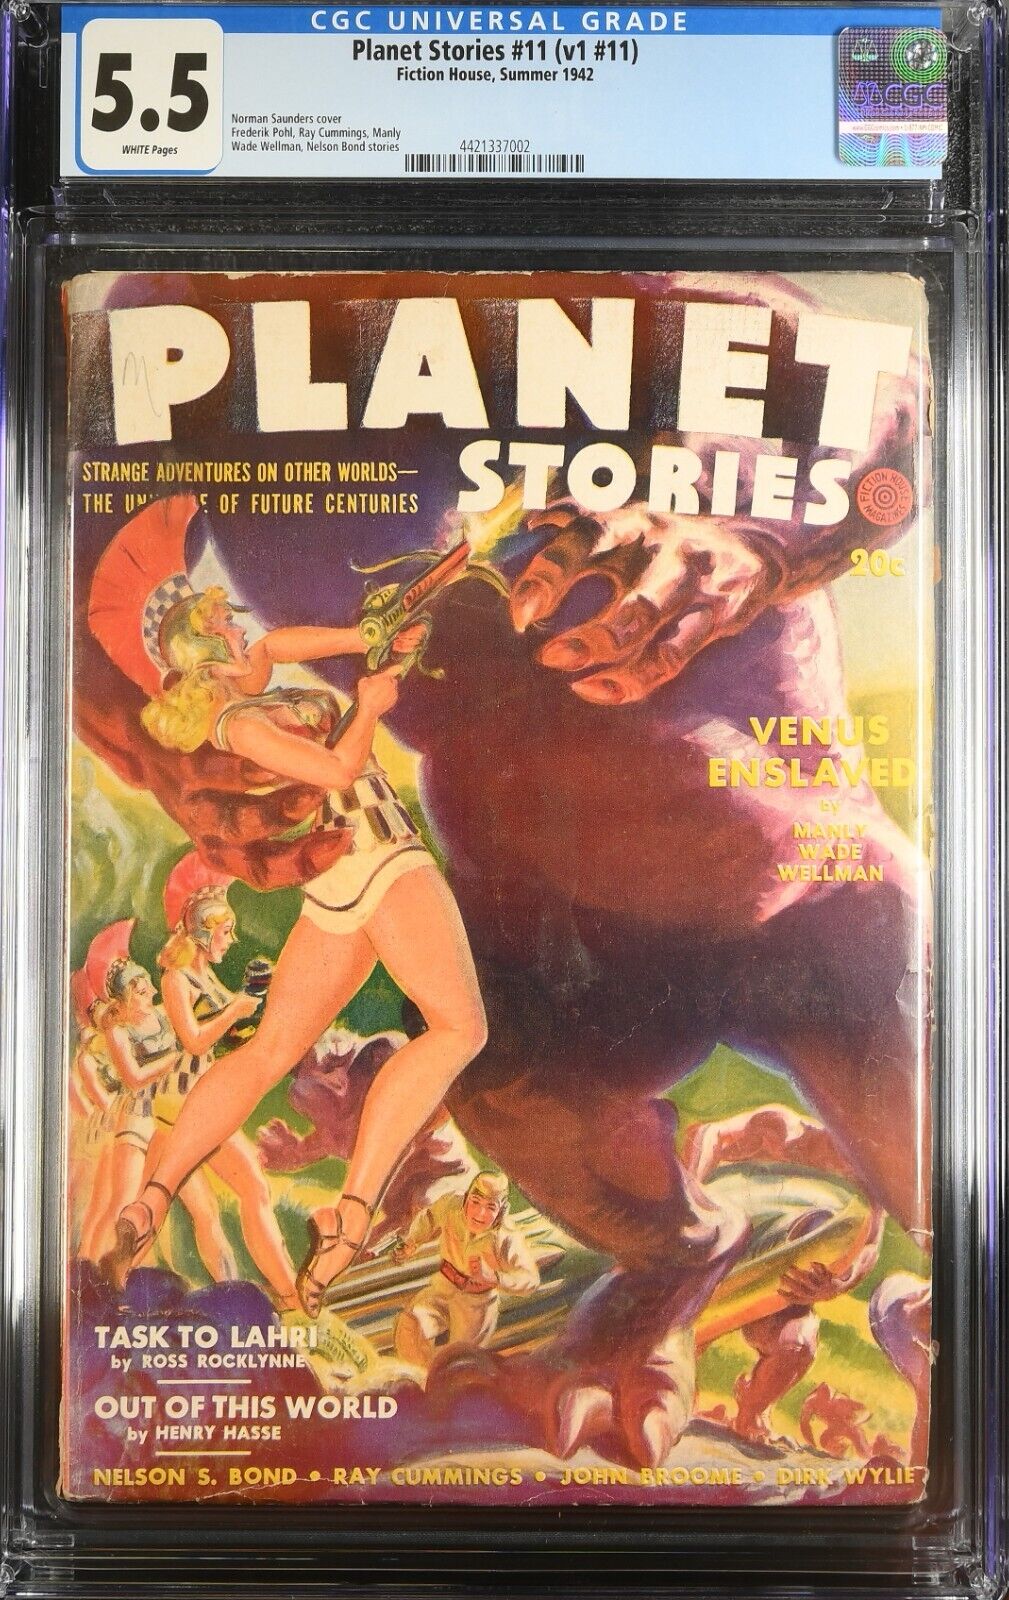 PLANET STORIES #11 (V1 #11) CGC 5.5 W PGS FICTION HOUSE SUMMER 1942 PULP SCI-FI